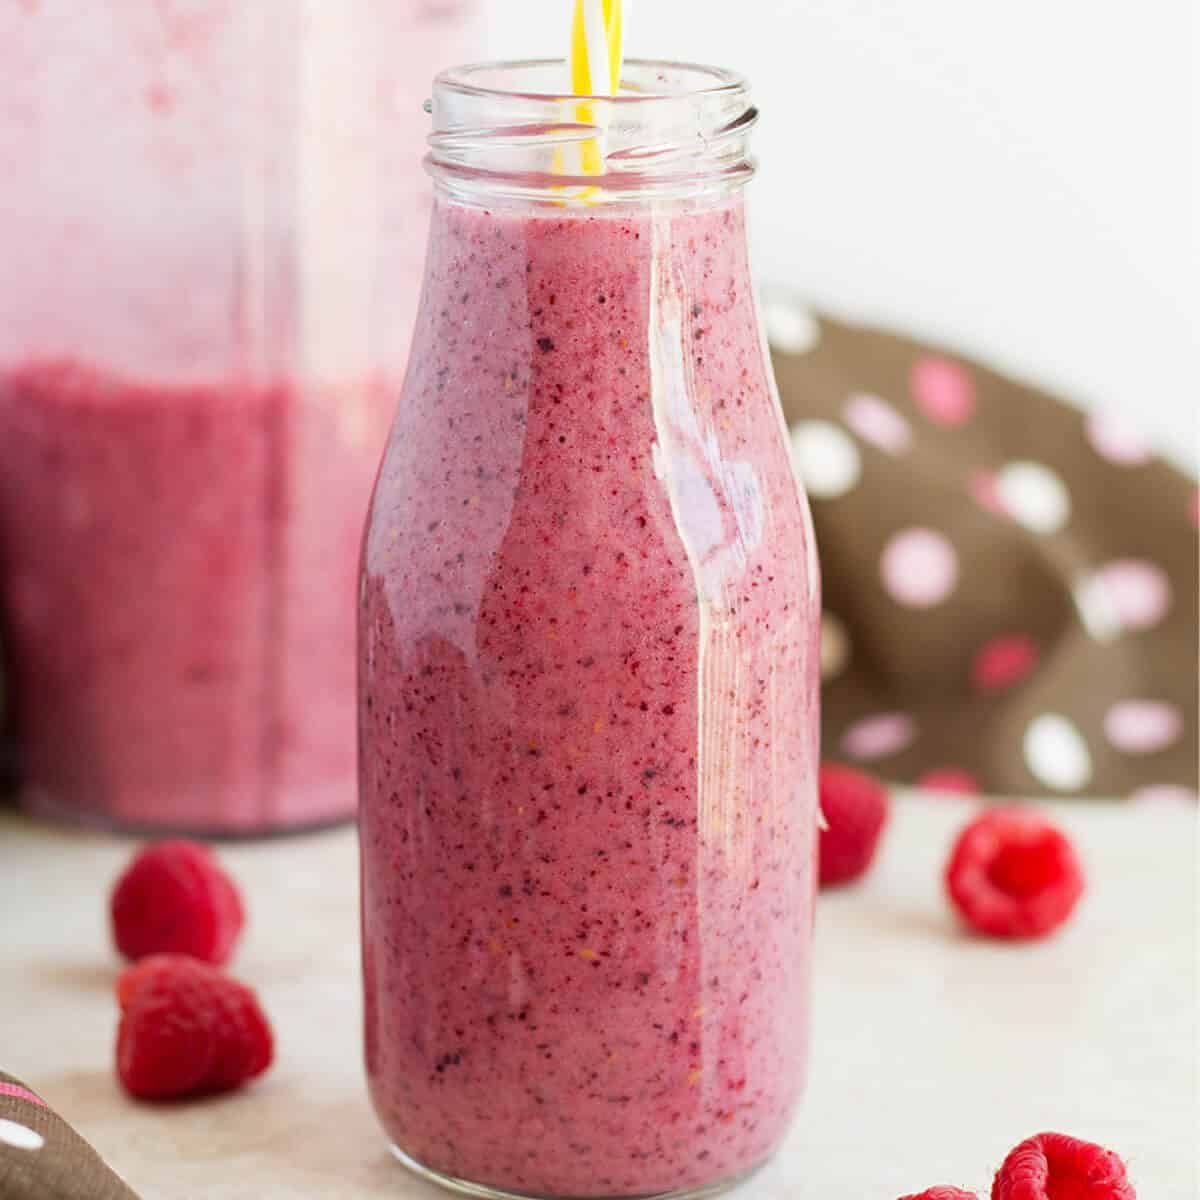 Vegan and dairy free mixed triple berry smoothie recipe made with ...